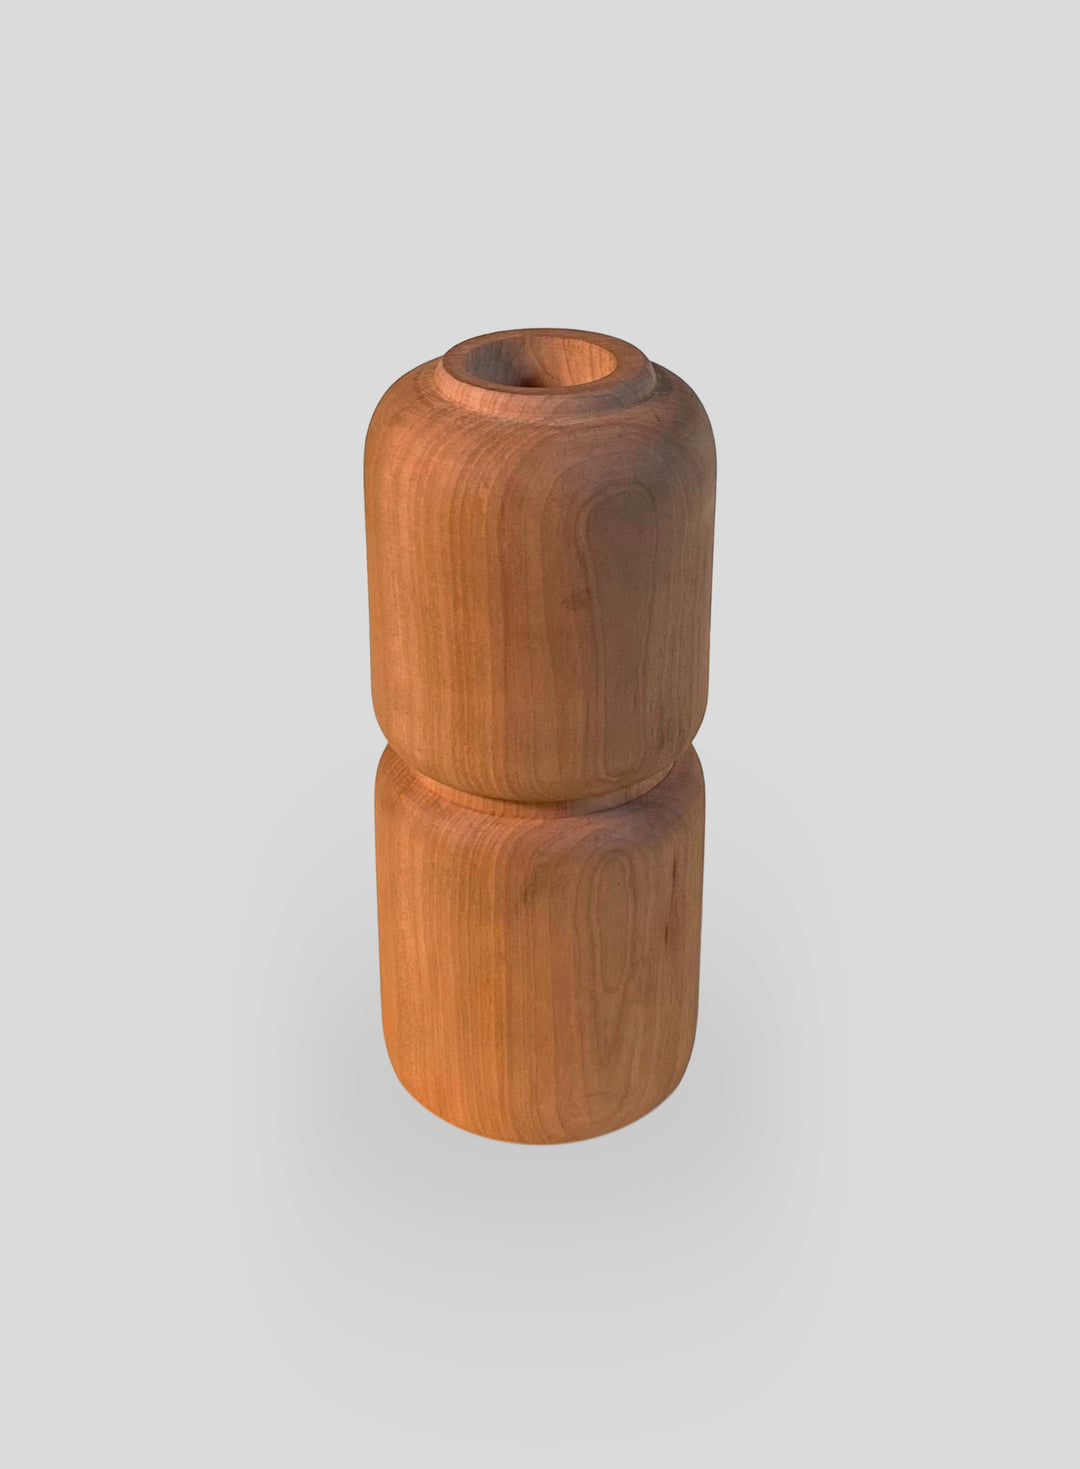 The Two Stacks Vase in Fireland Cherry